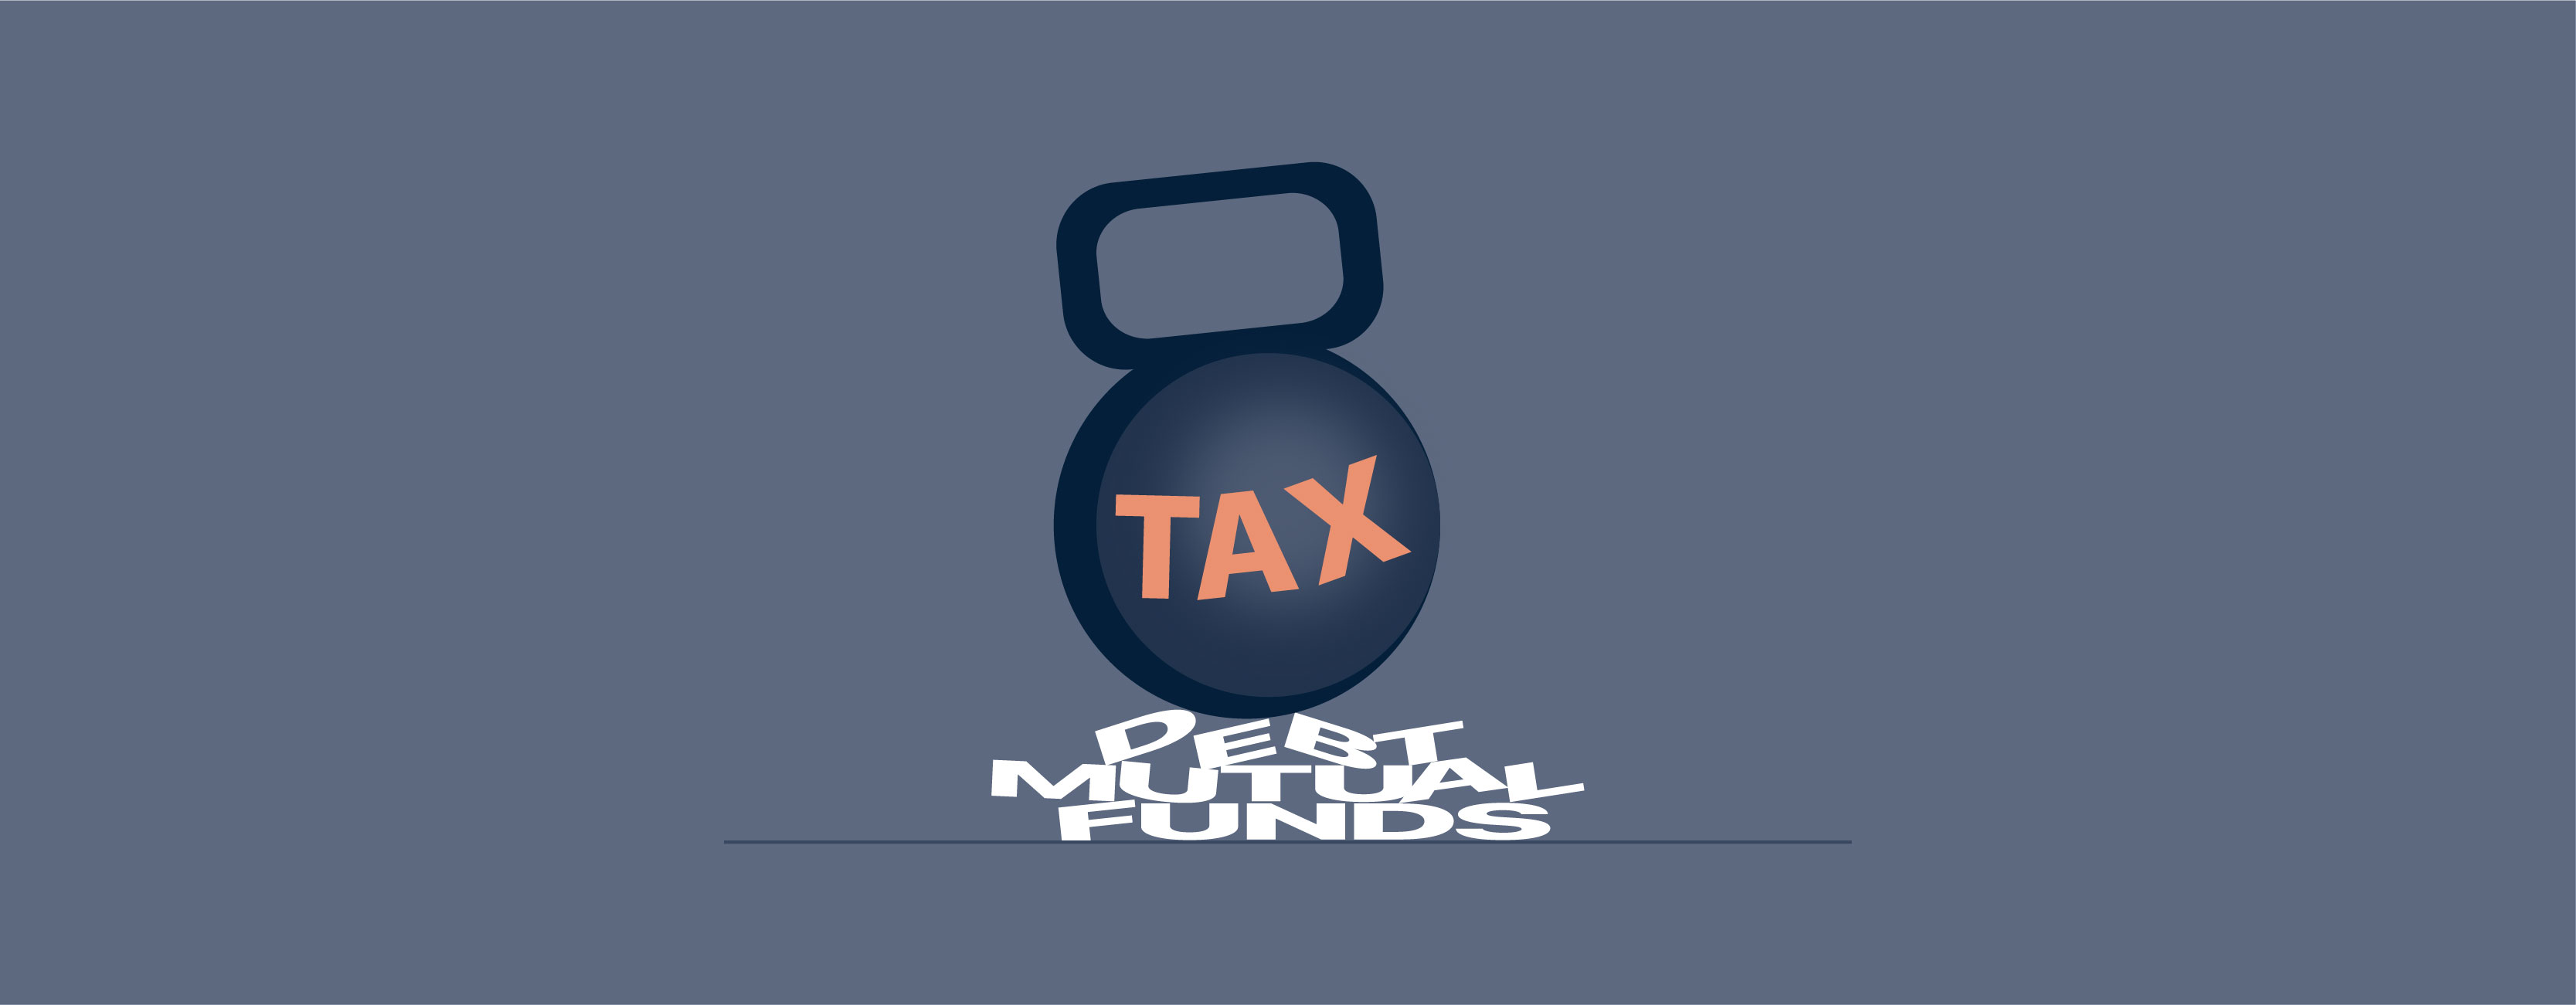 Debt Mutual Funds Lose Benefits Tax